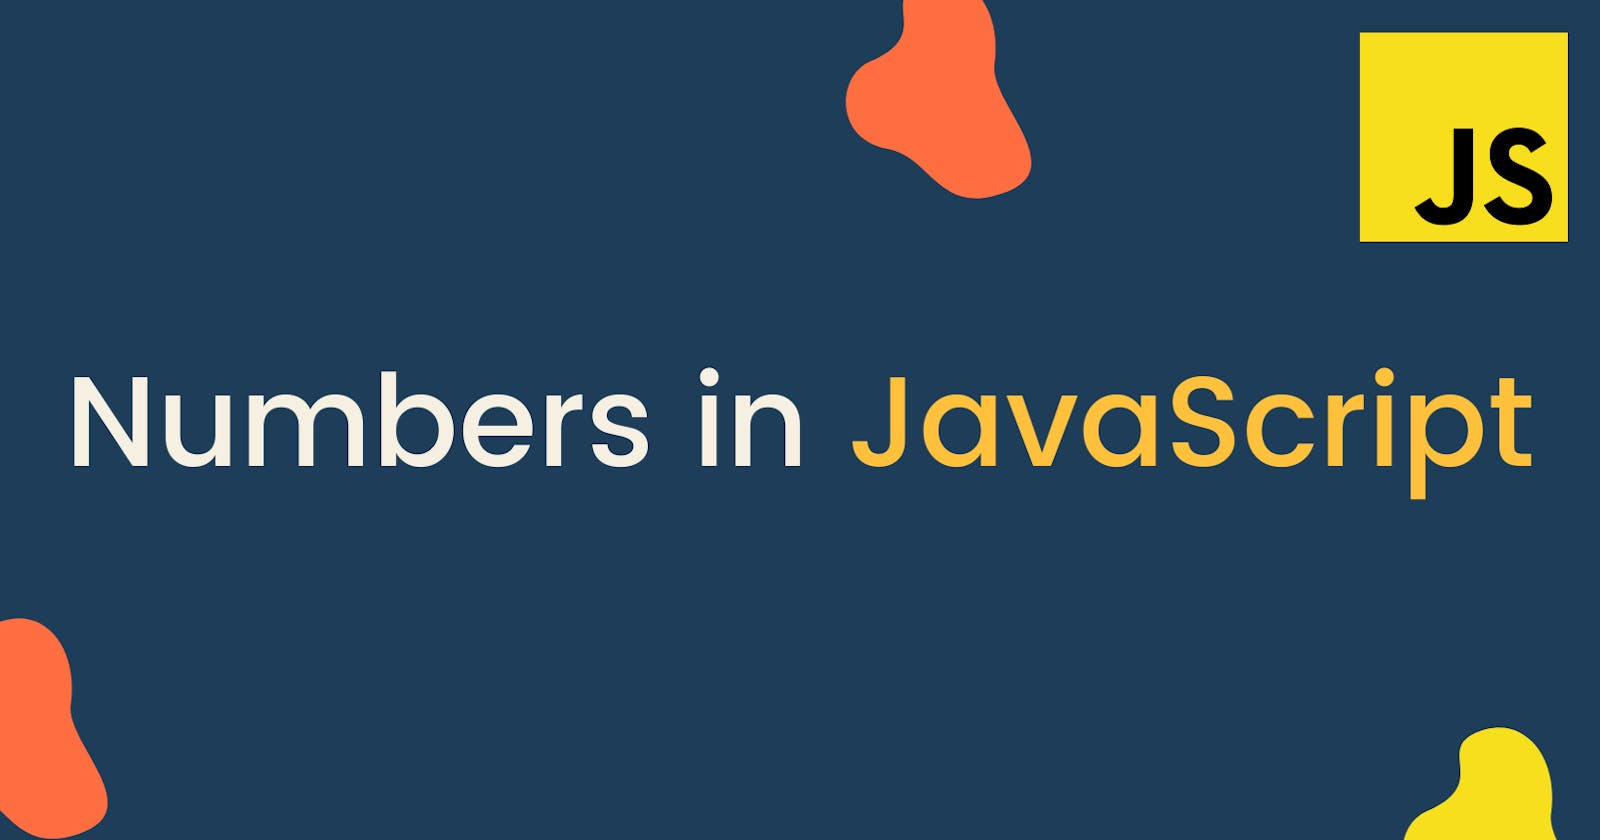 Learn about Numbers in JavaScript